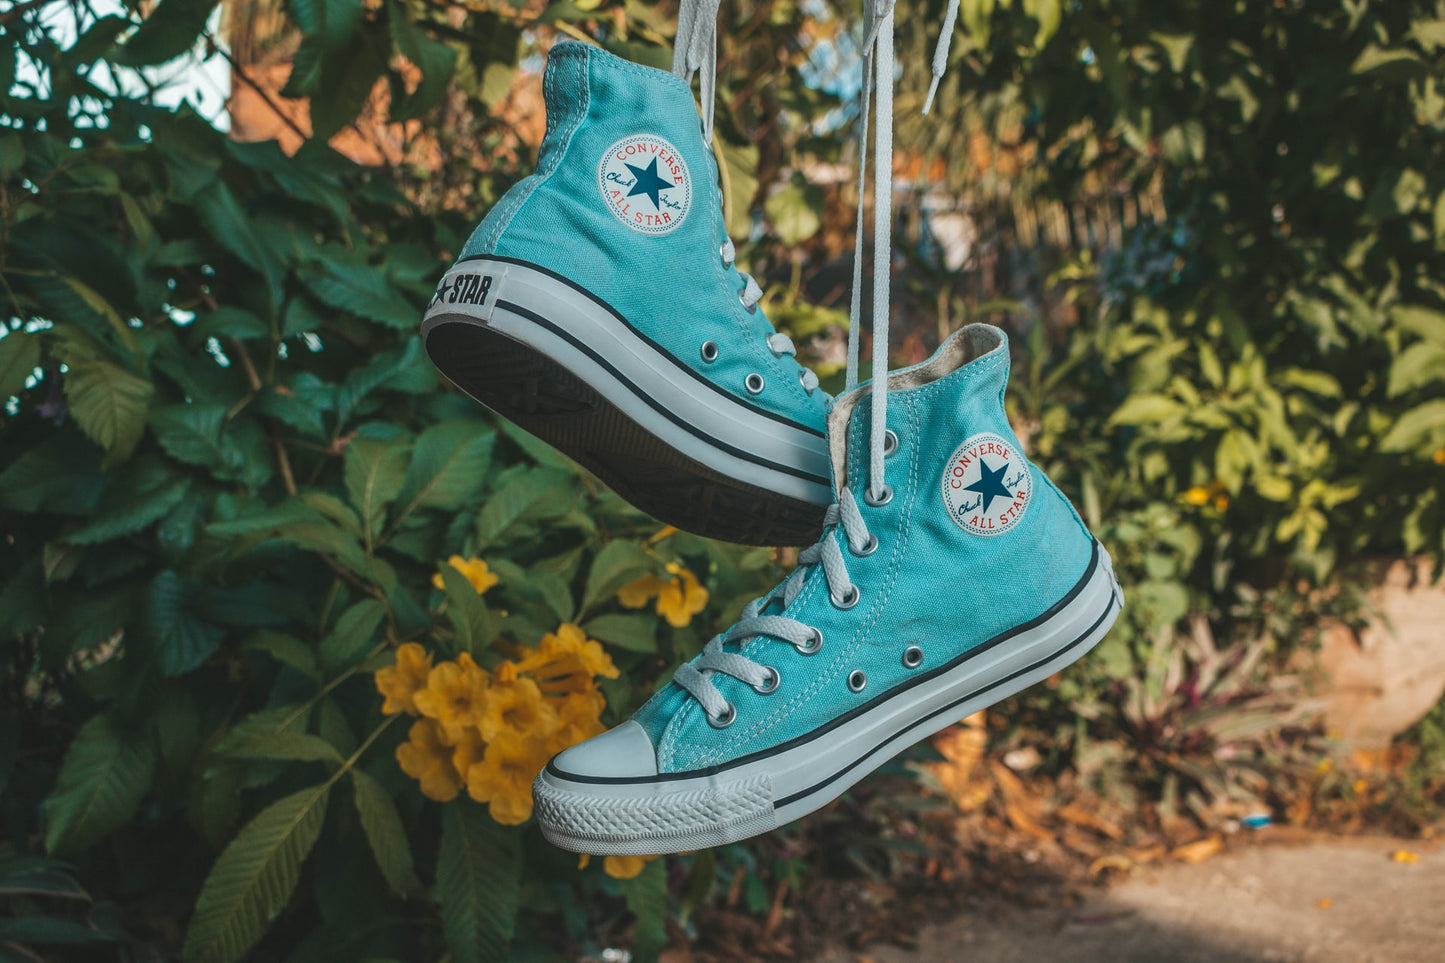 30 DIY Ways To Jazz Up Your Converse Sneakers